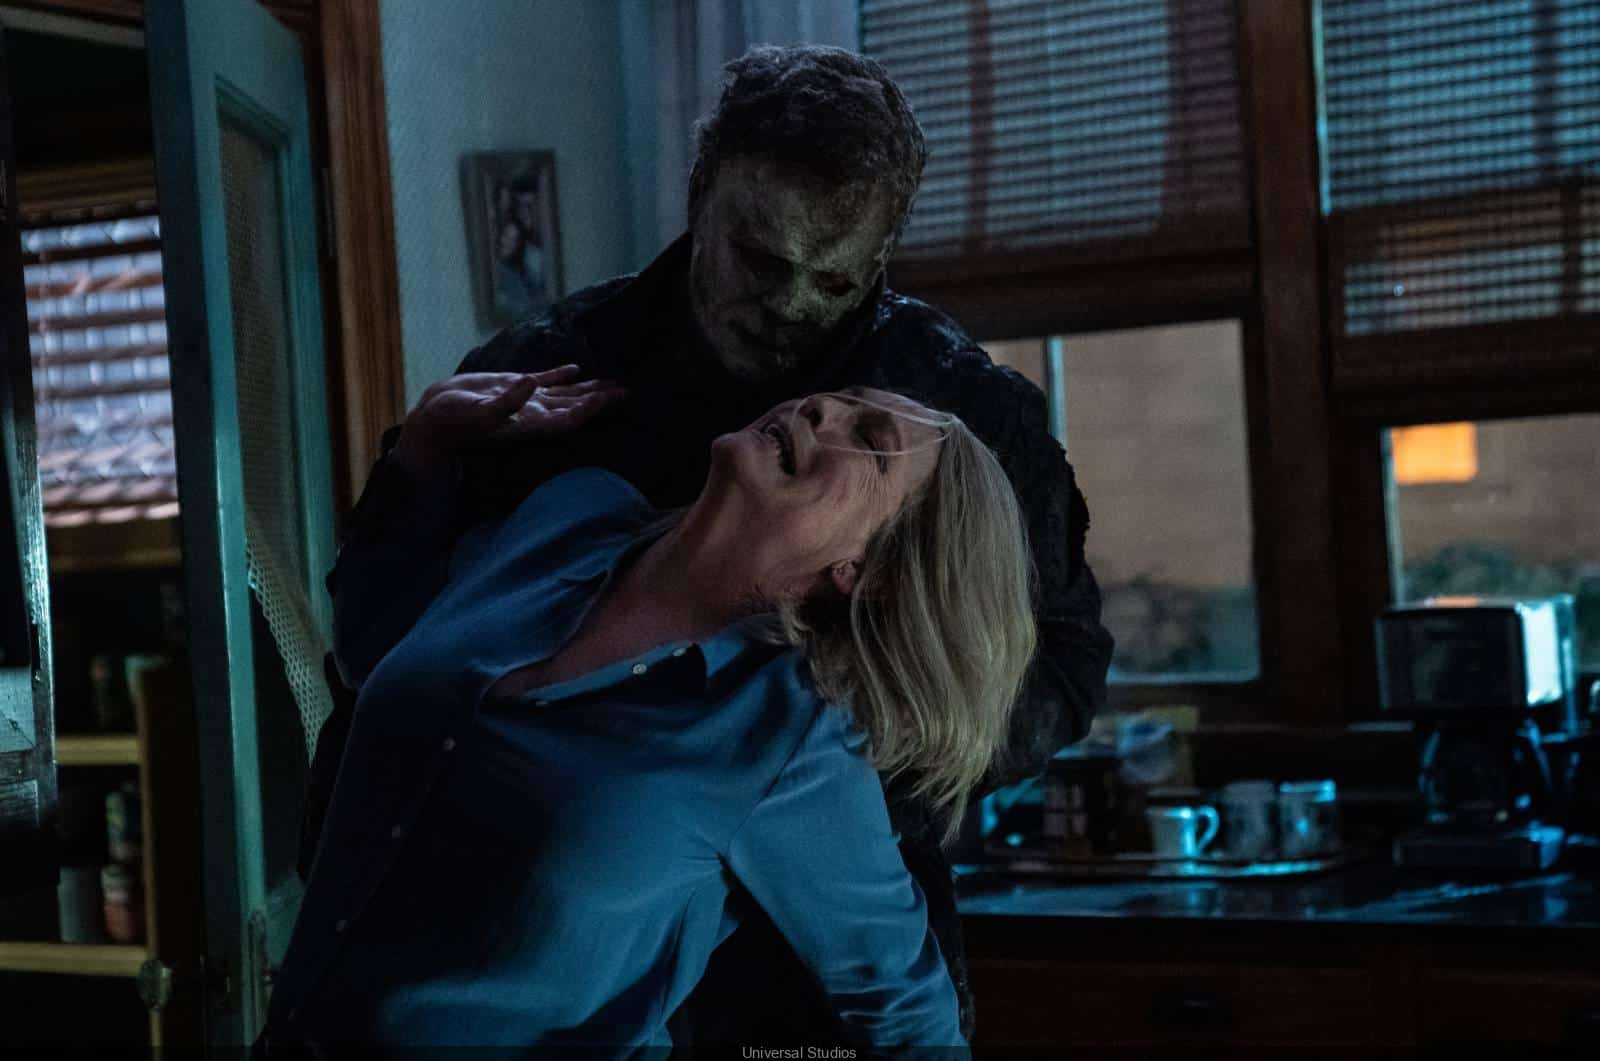 Michael attempts to kill Laurie